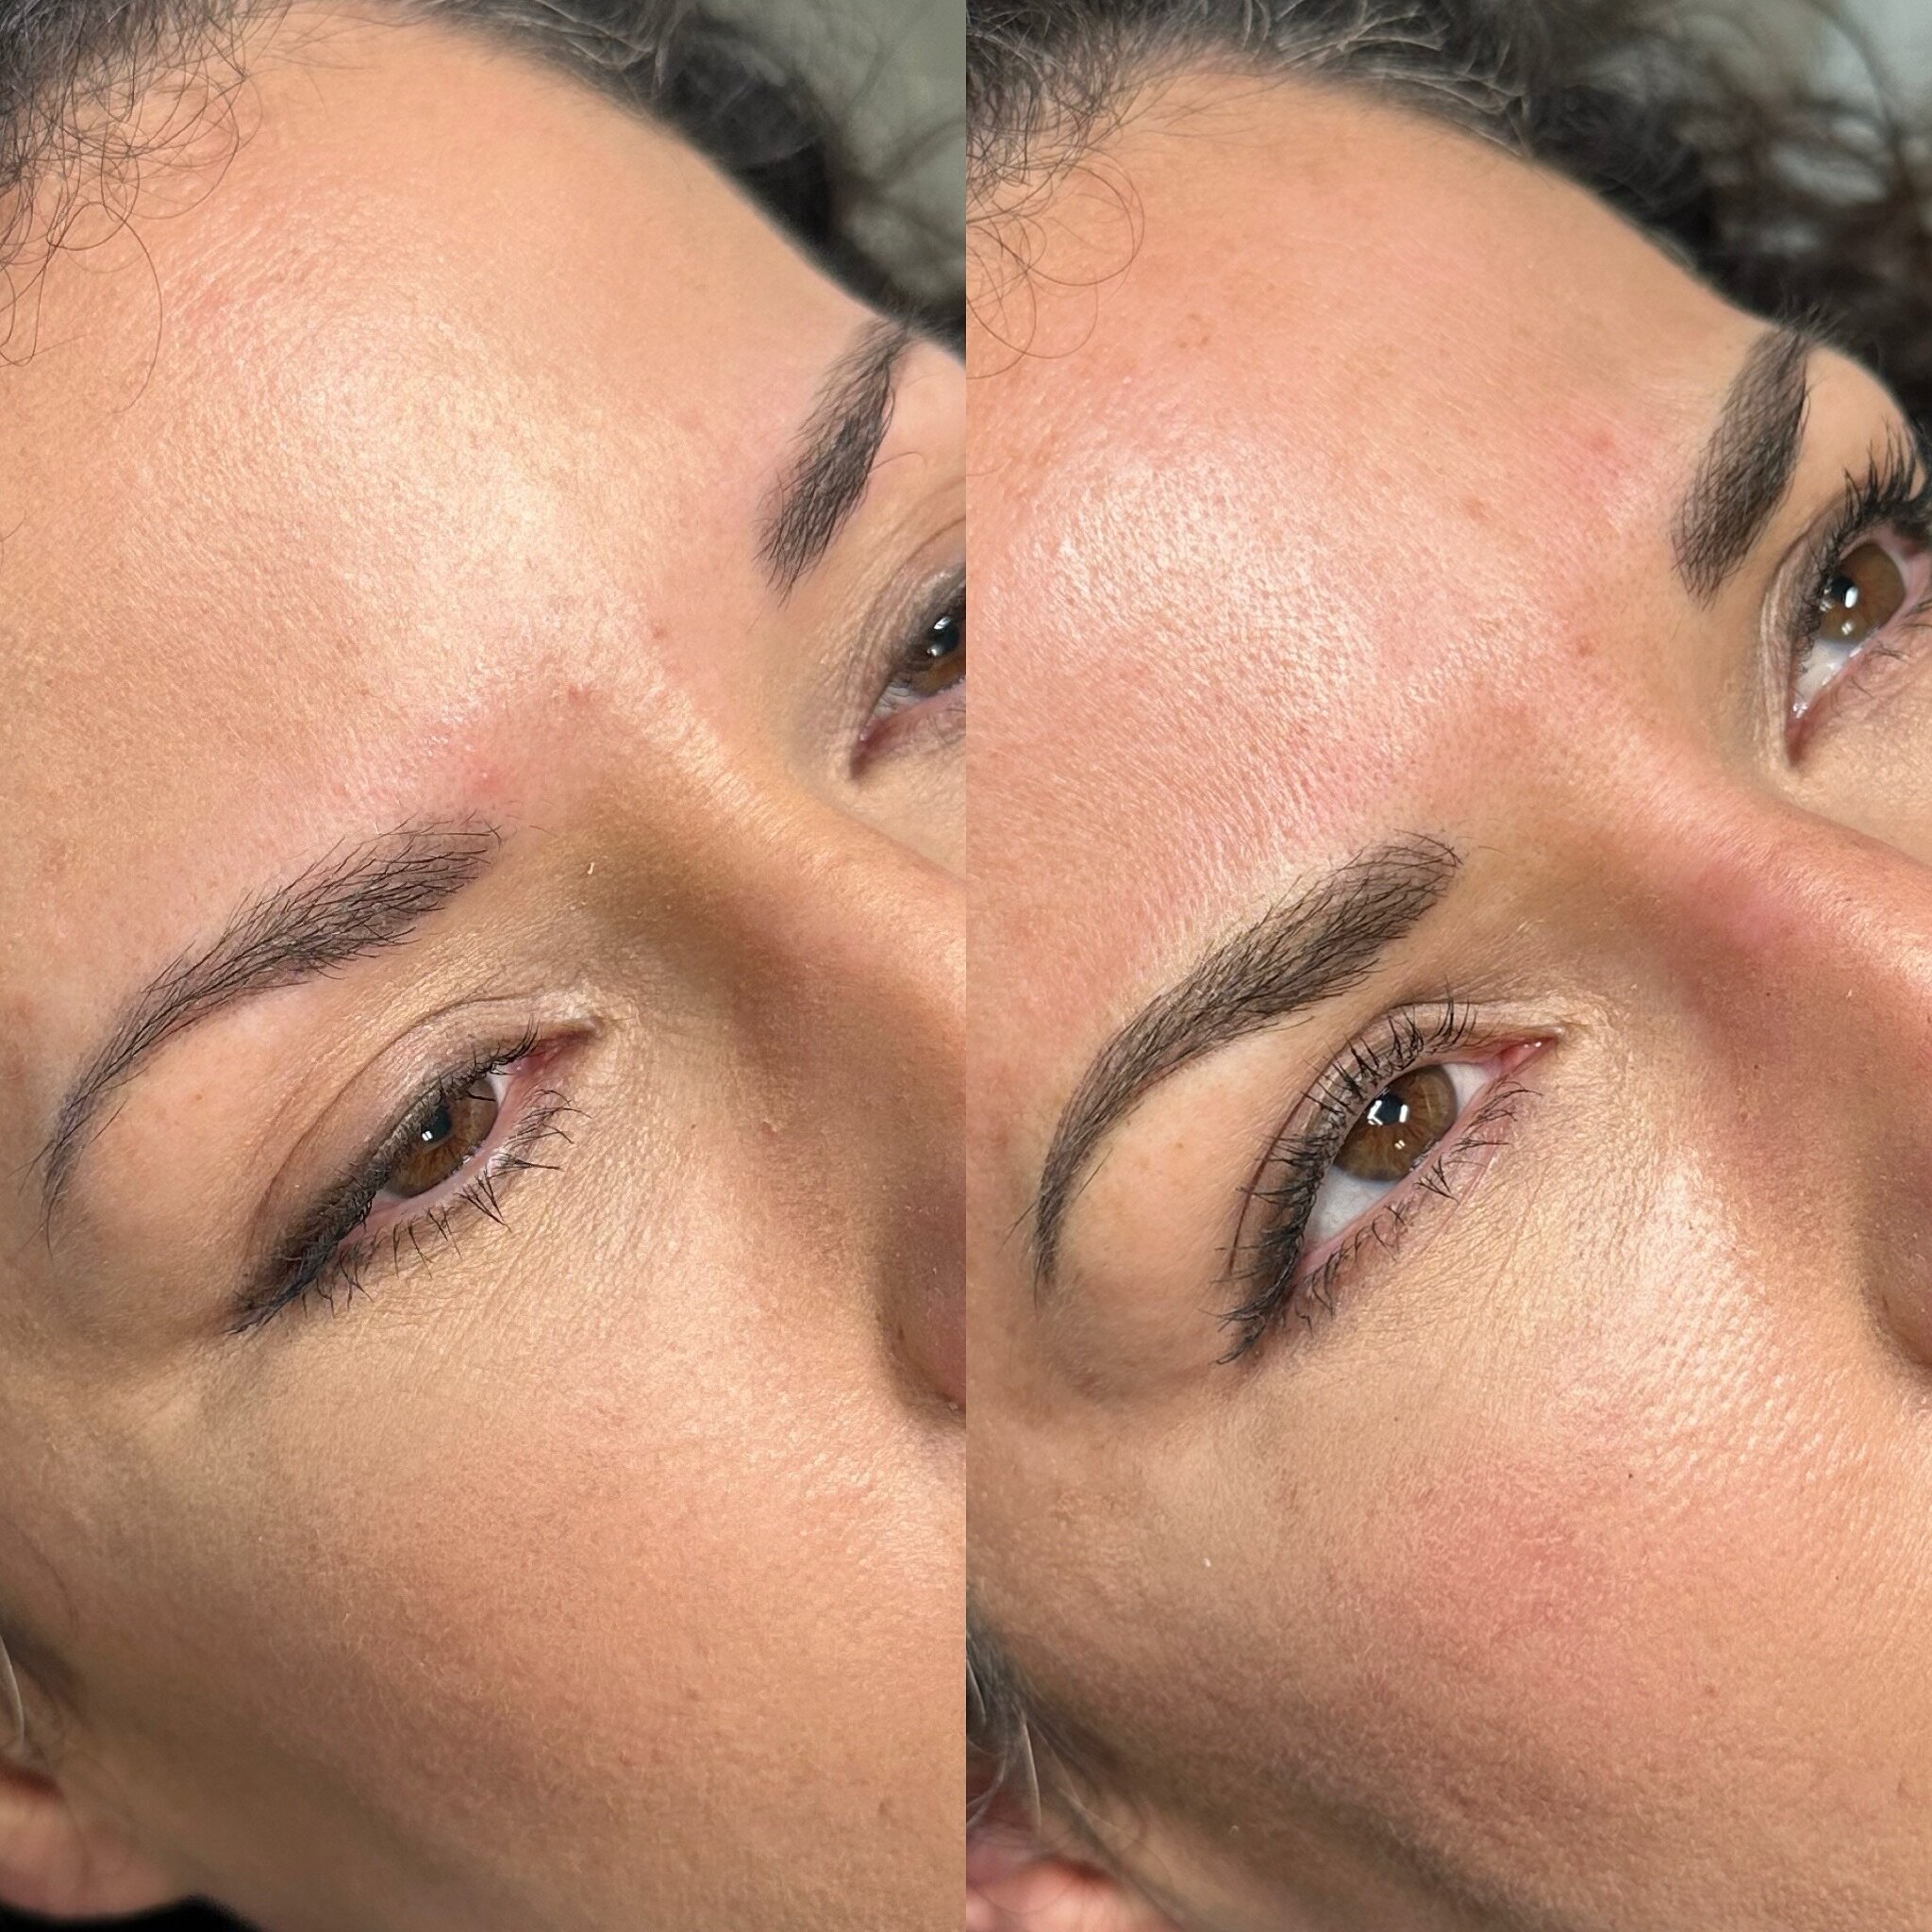 &ldquo;After&rdquo; and after! Started with shading which is healed in the left photo, and at the touchup I added microblade strokes. My new studio is open in Roseville inside of @sidneylebeauty_roseville and I am taking new clients :) link in bio to